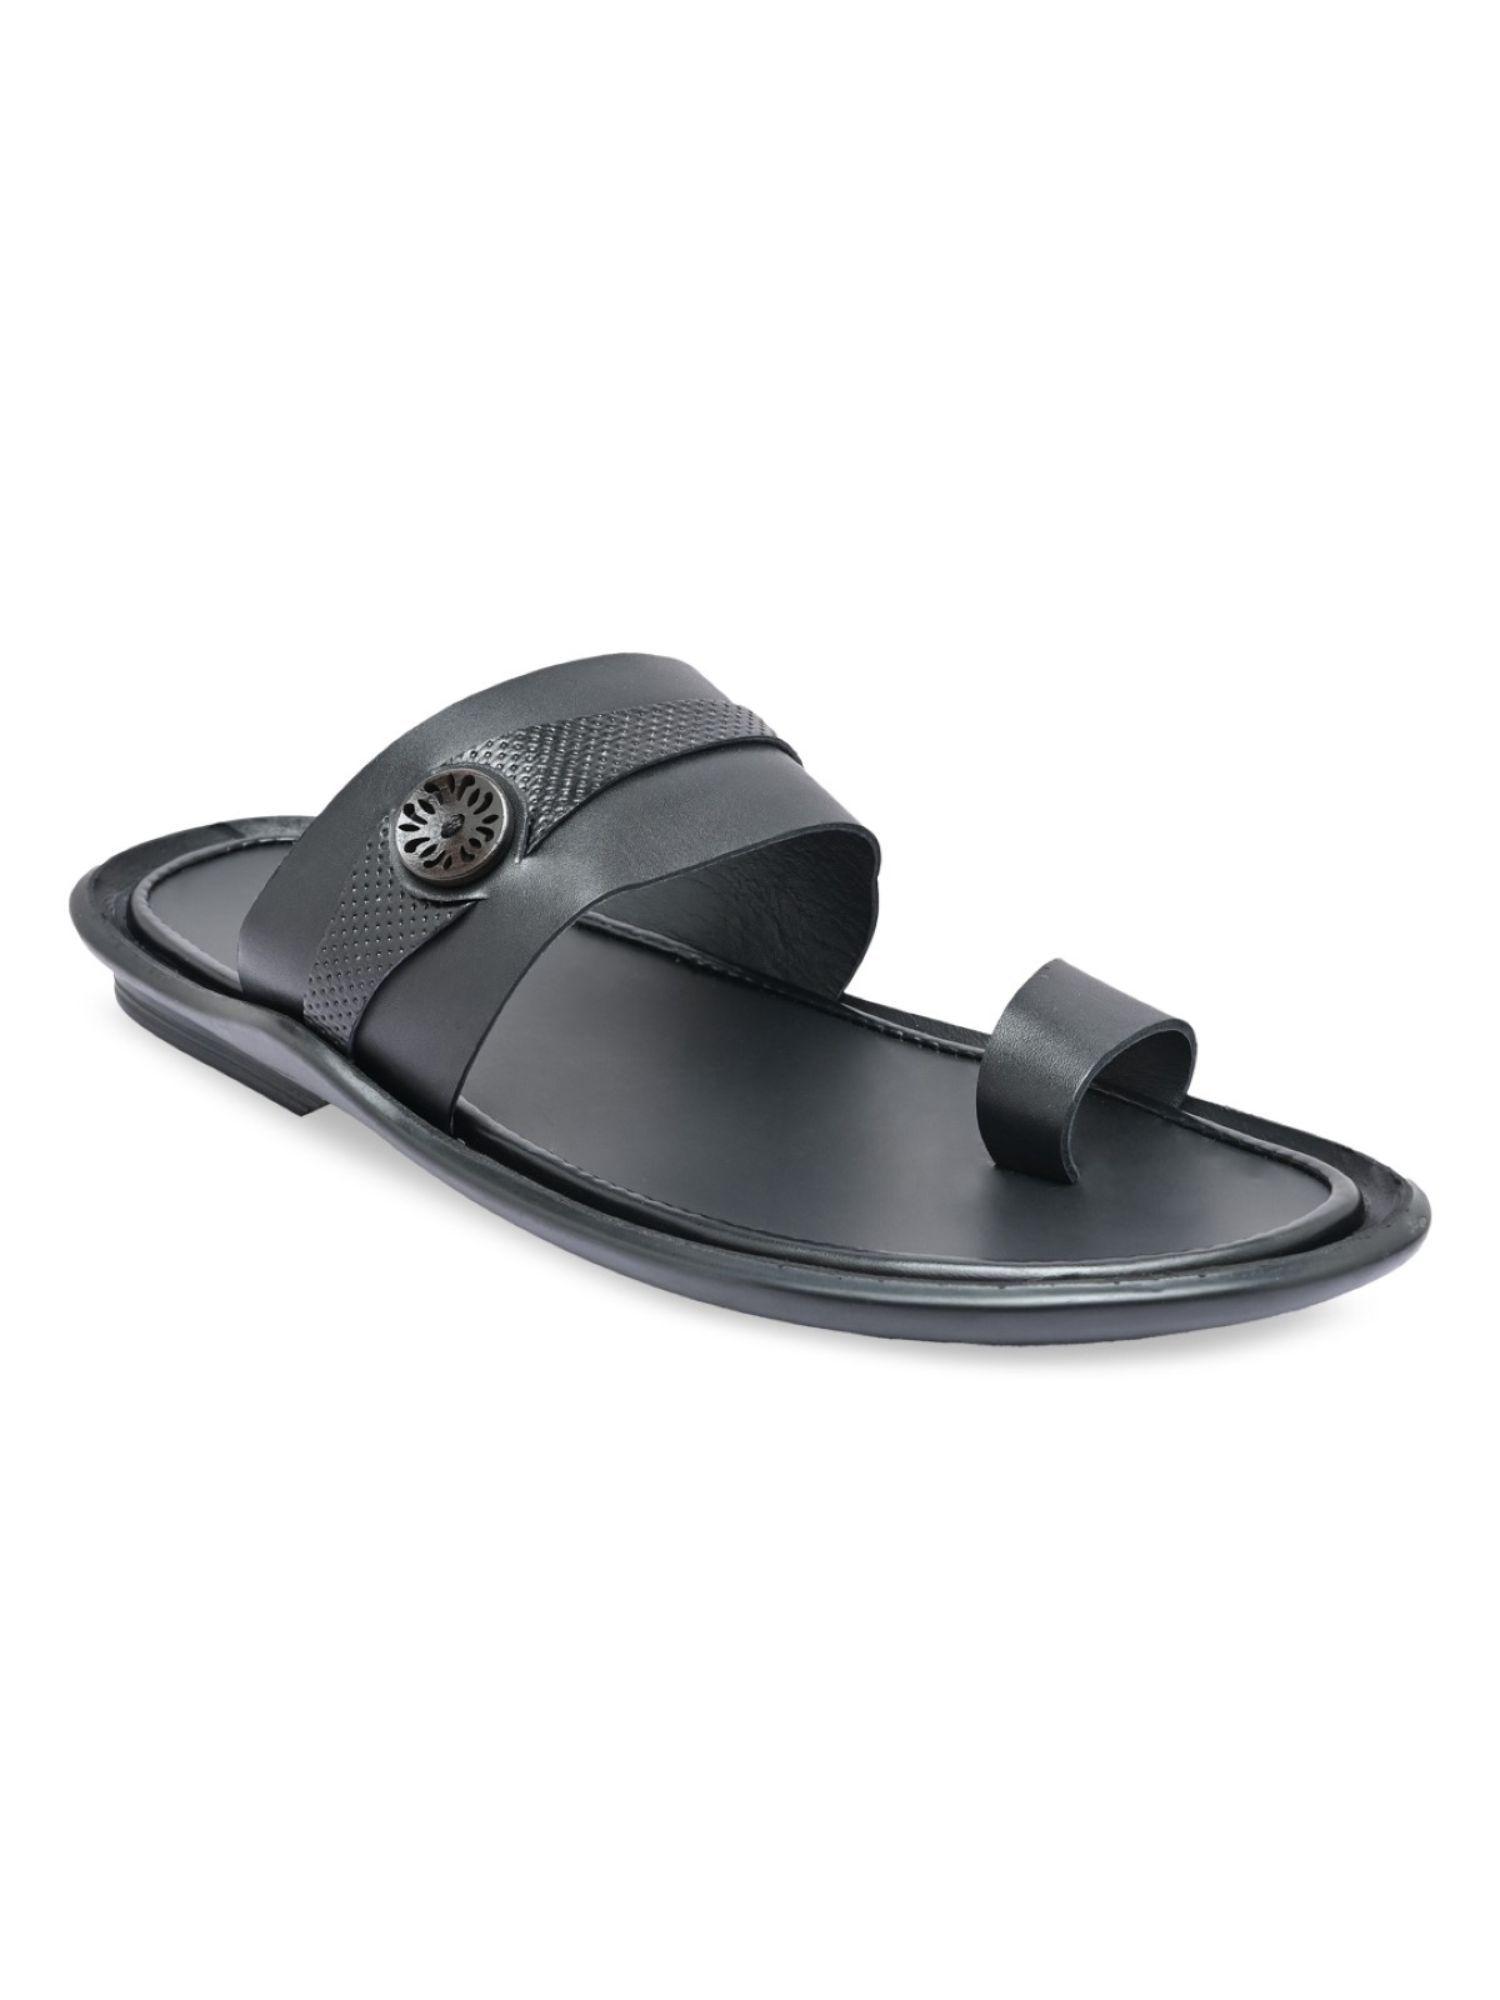 Men Black Solid Casual Leather Sandals